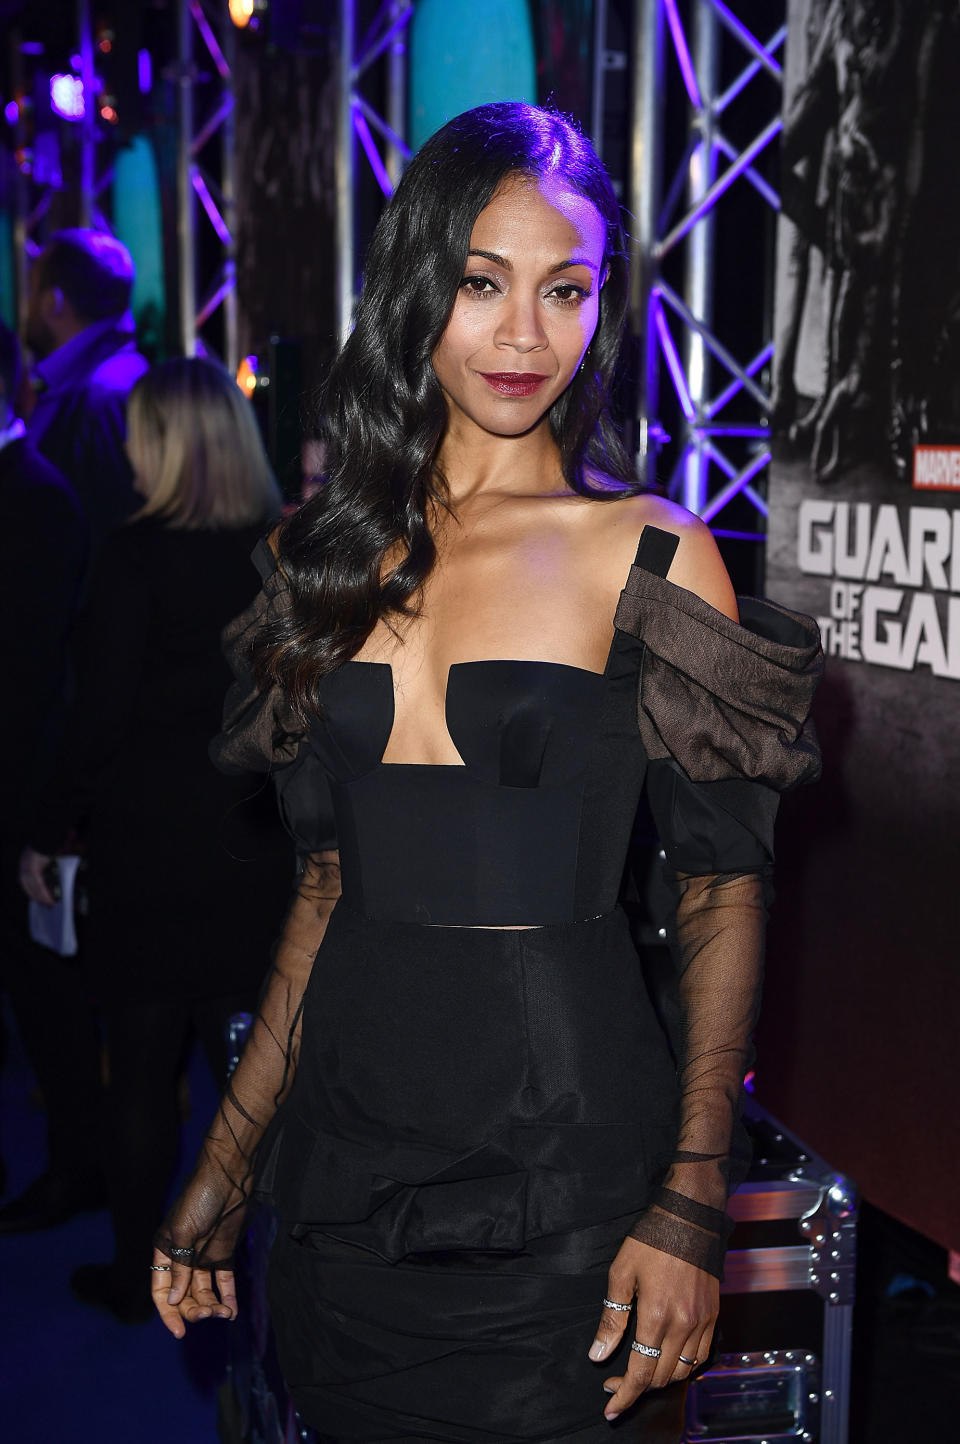 Zoe wearing a black shoulder-less dress with puffy black mesh sleeves. She is smiling at the Guardians of the Galaxy premiere